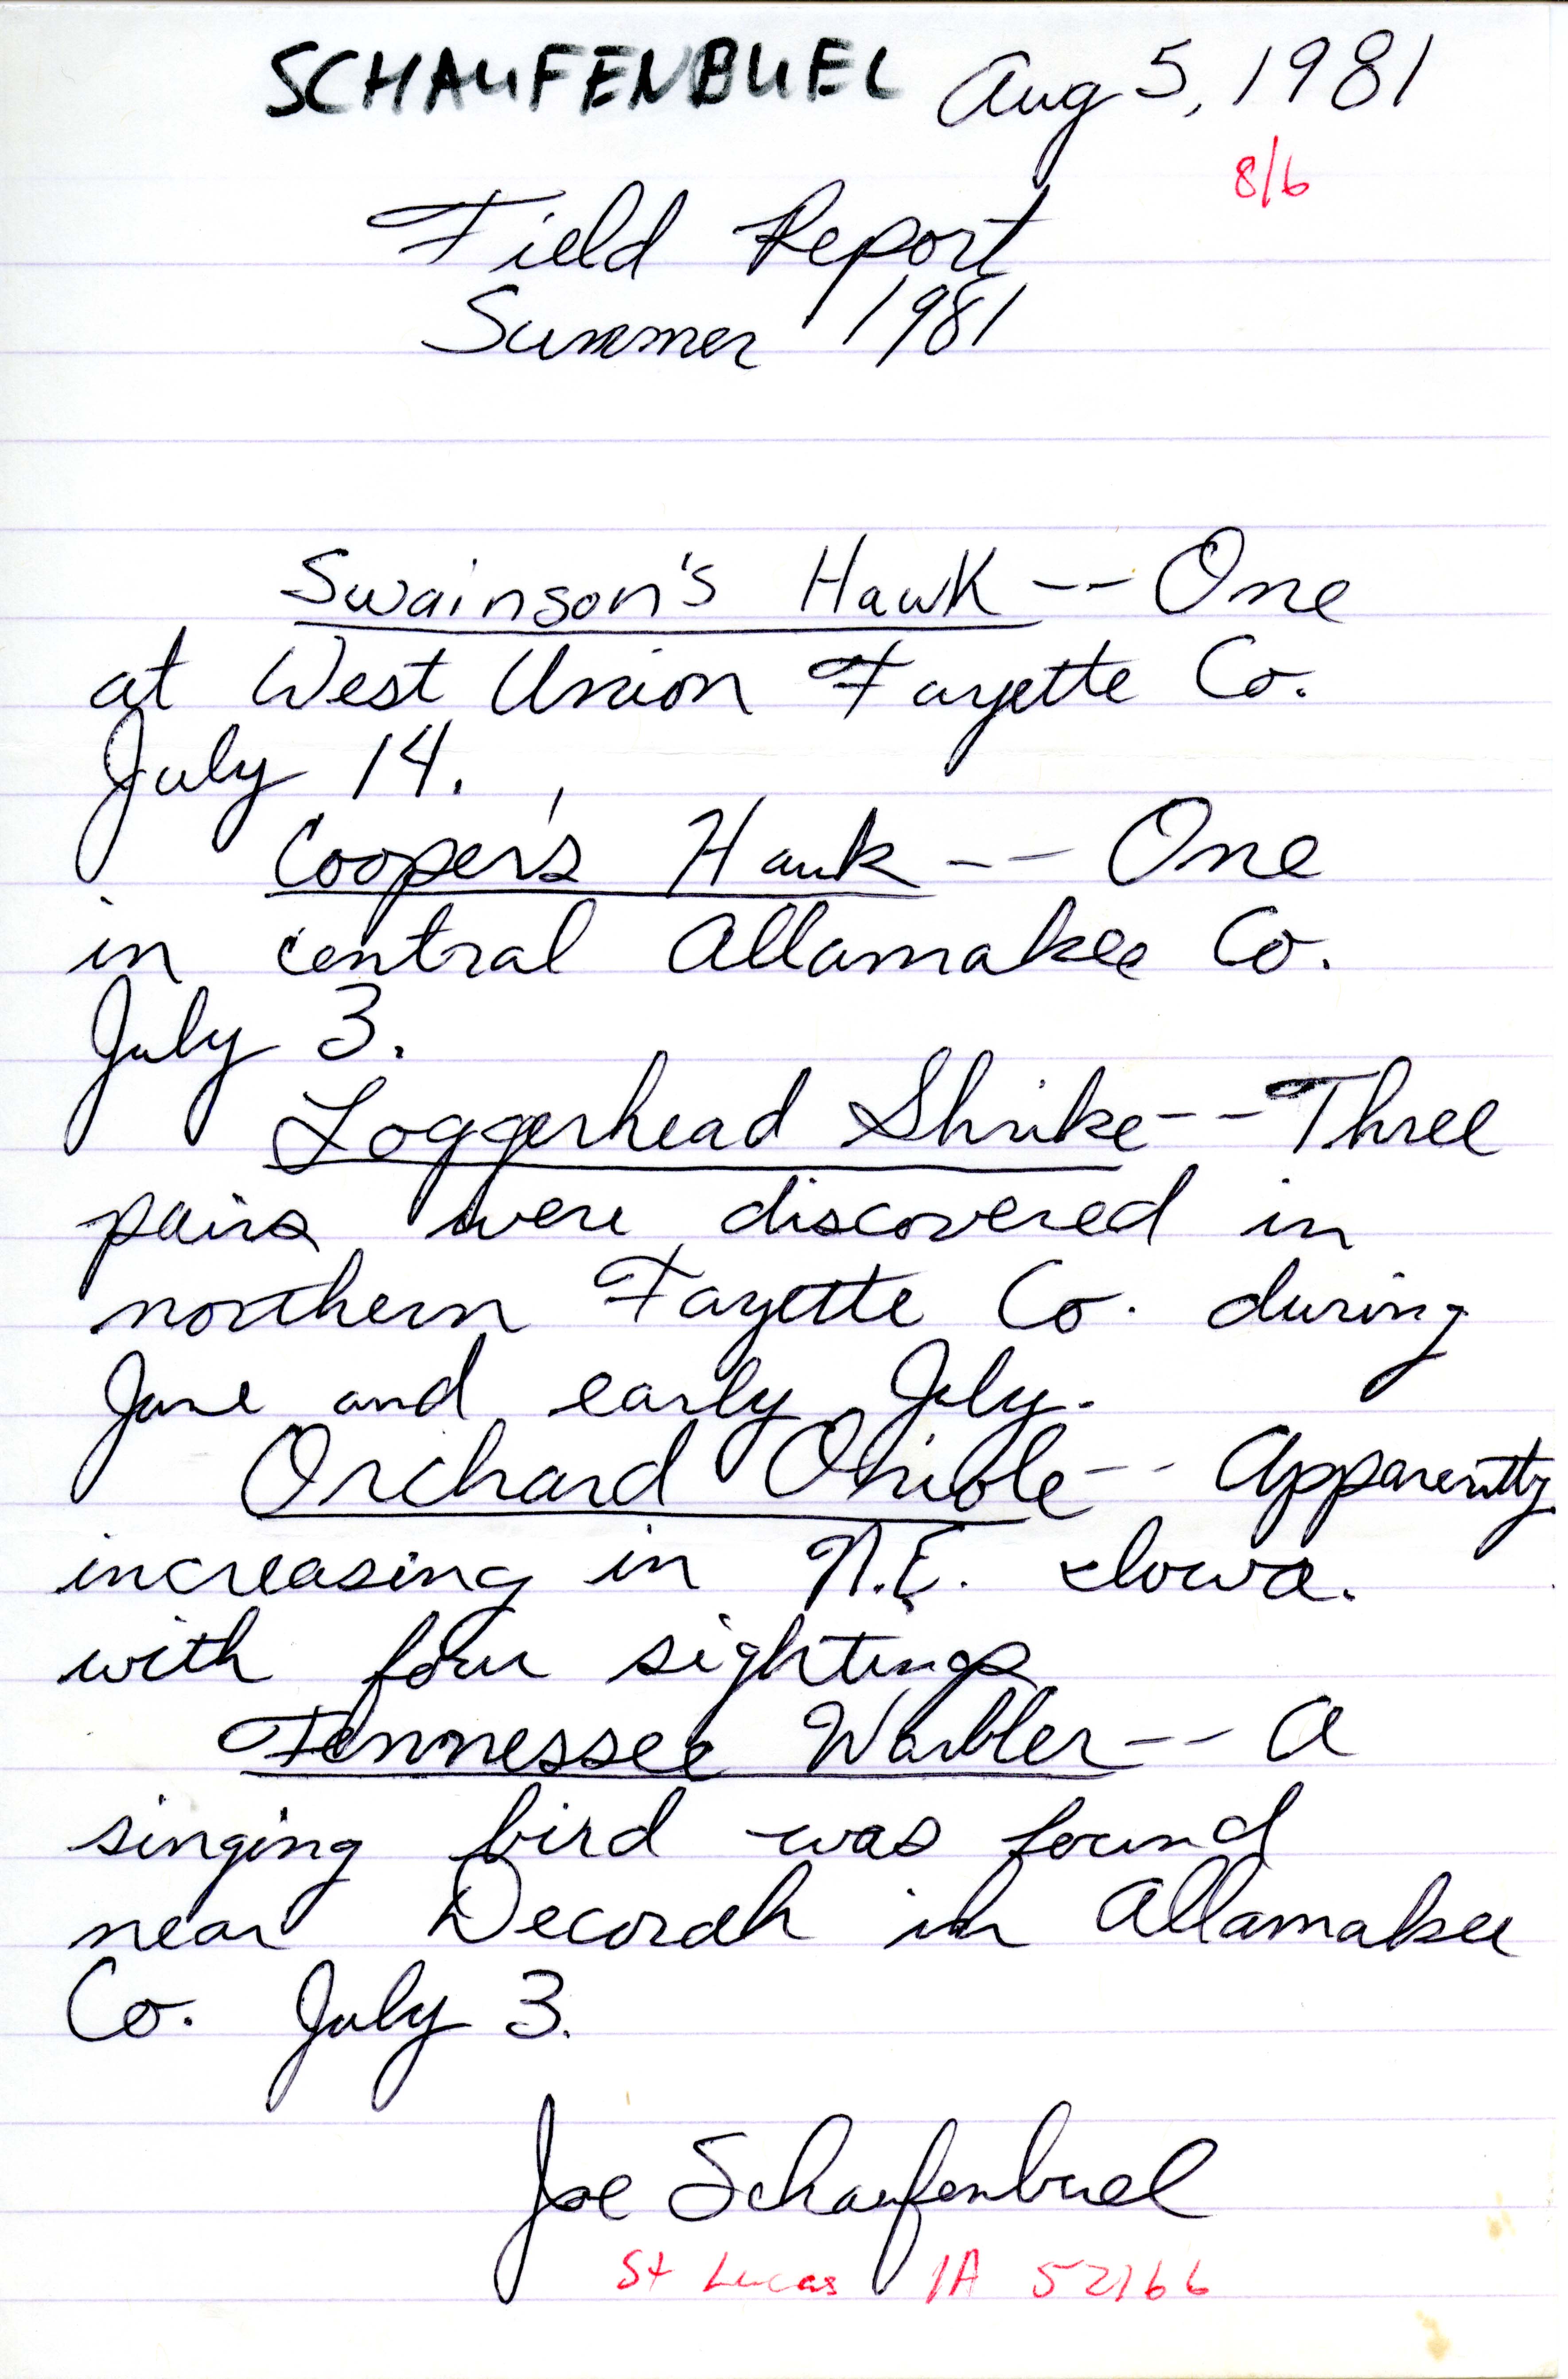 Field notes contributed by Joseph P. Schaufenbuel, August 5, 1981